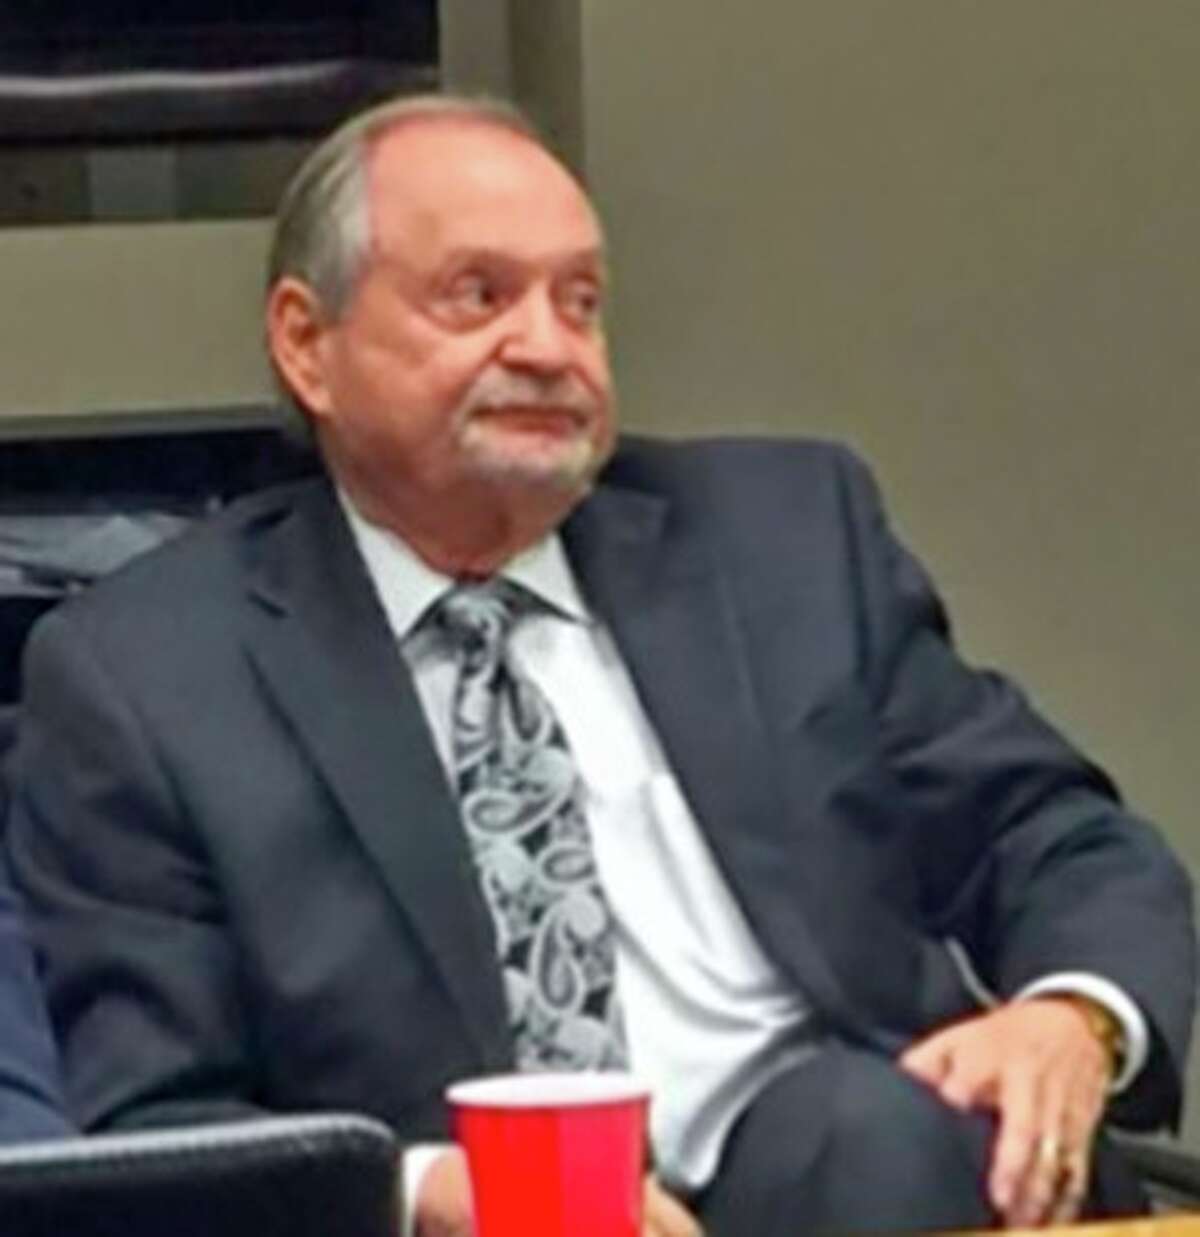 Former Pasadena economic development corporation chairman Roy Mease, shown in this file photo, was indicted in January on a charge of violating the Texas Open Meetings Act.